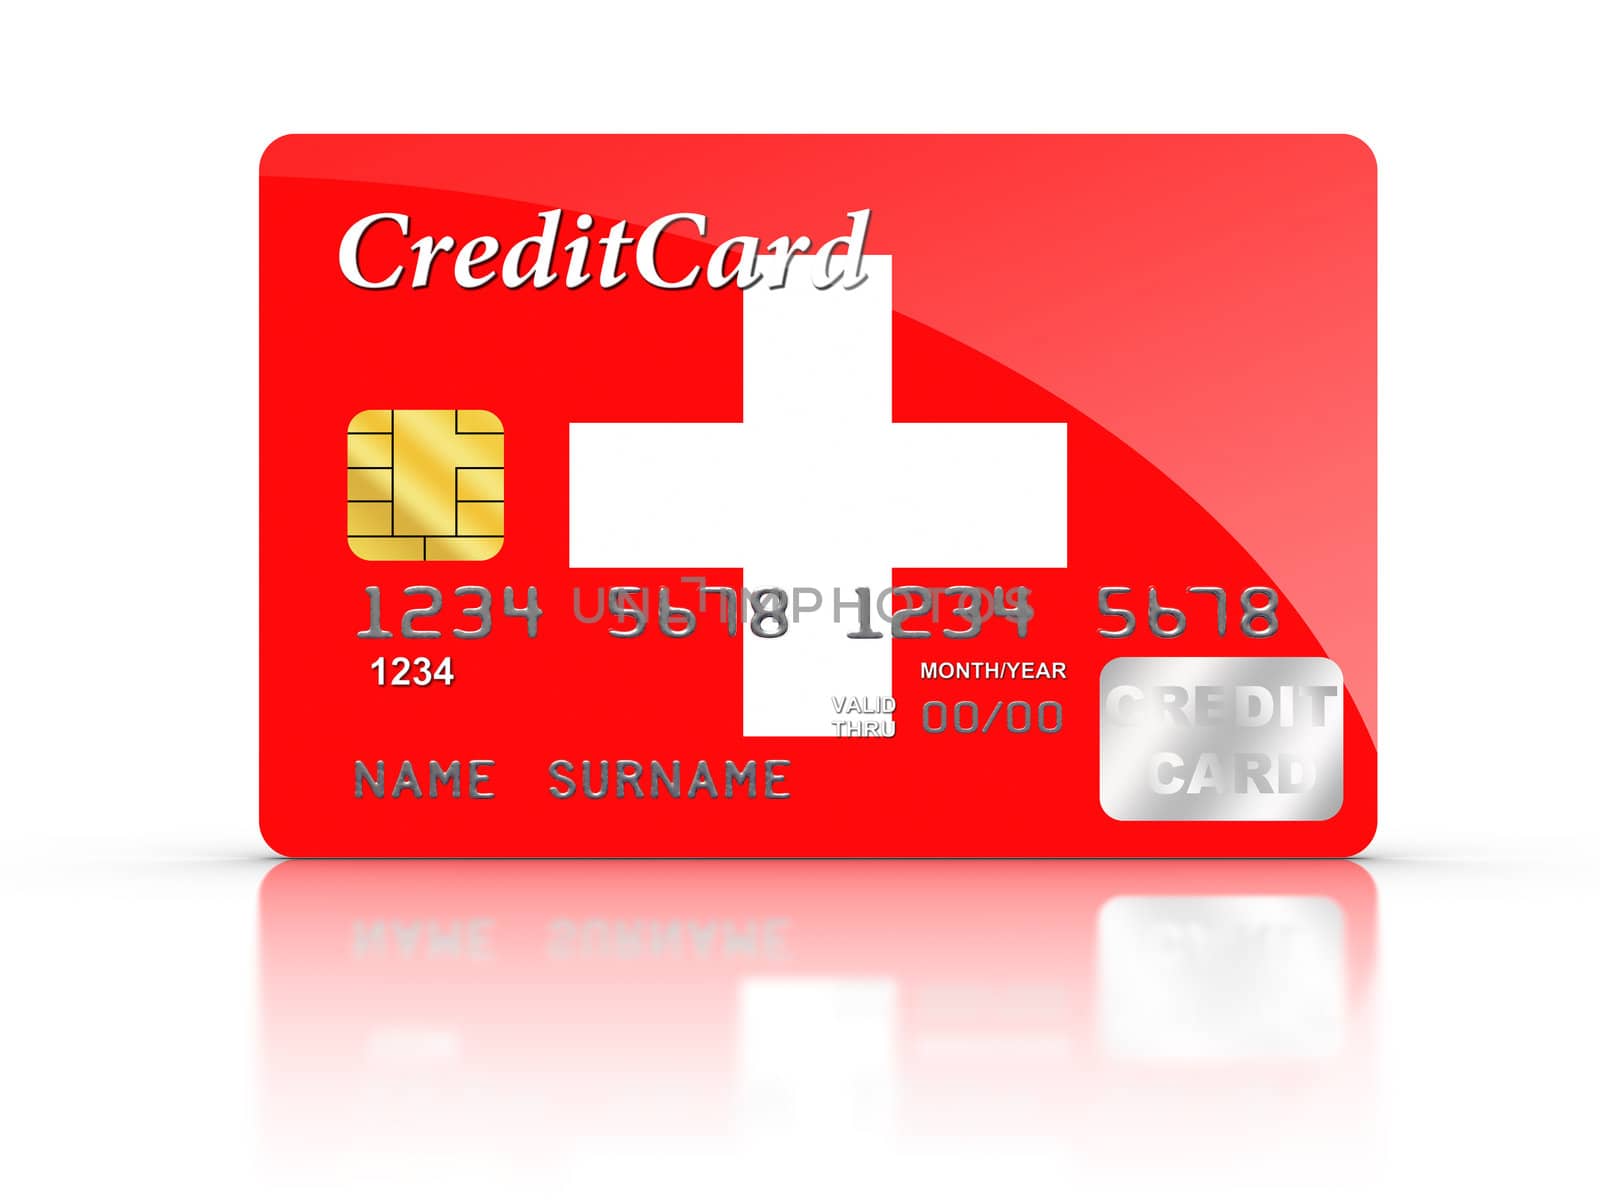 3D rendered Credit Card covered with Switzerland flag.